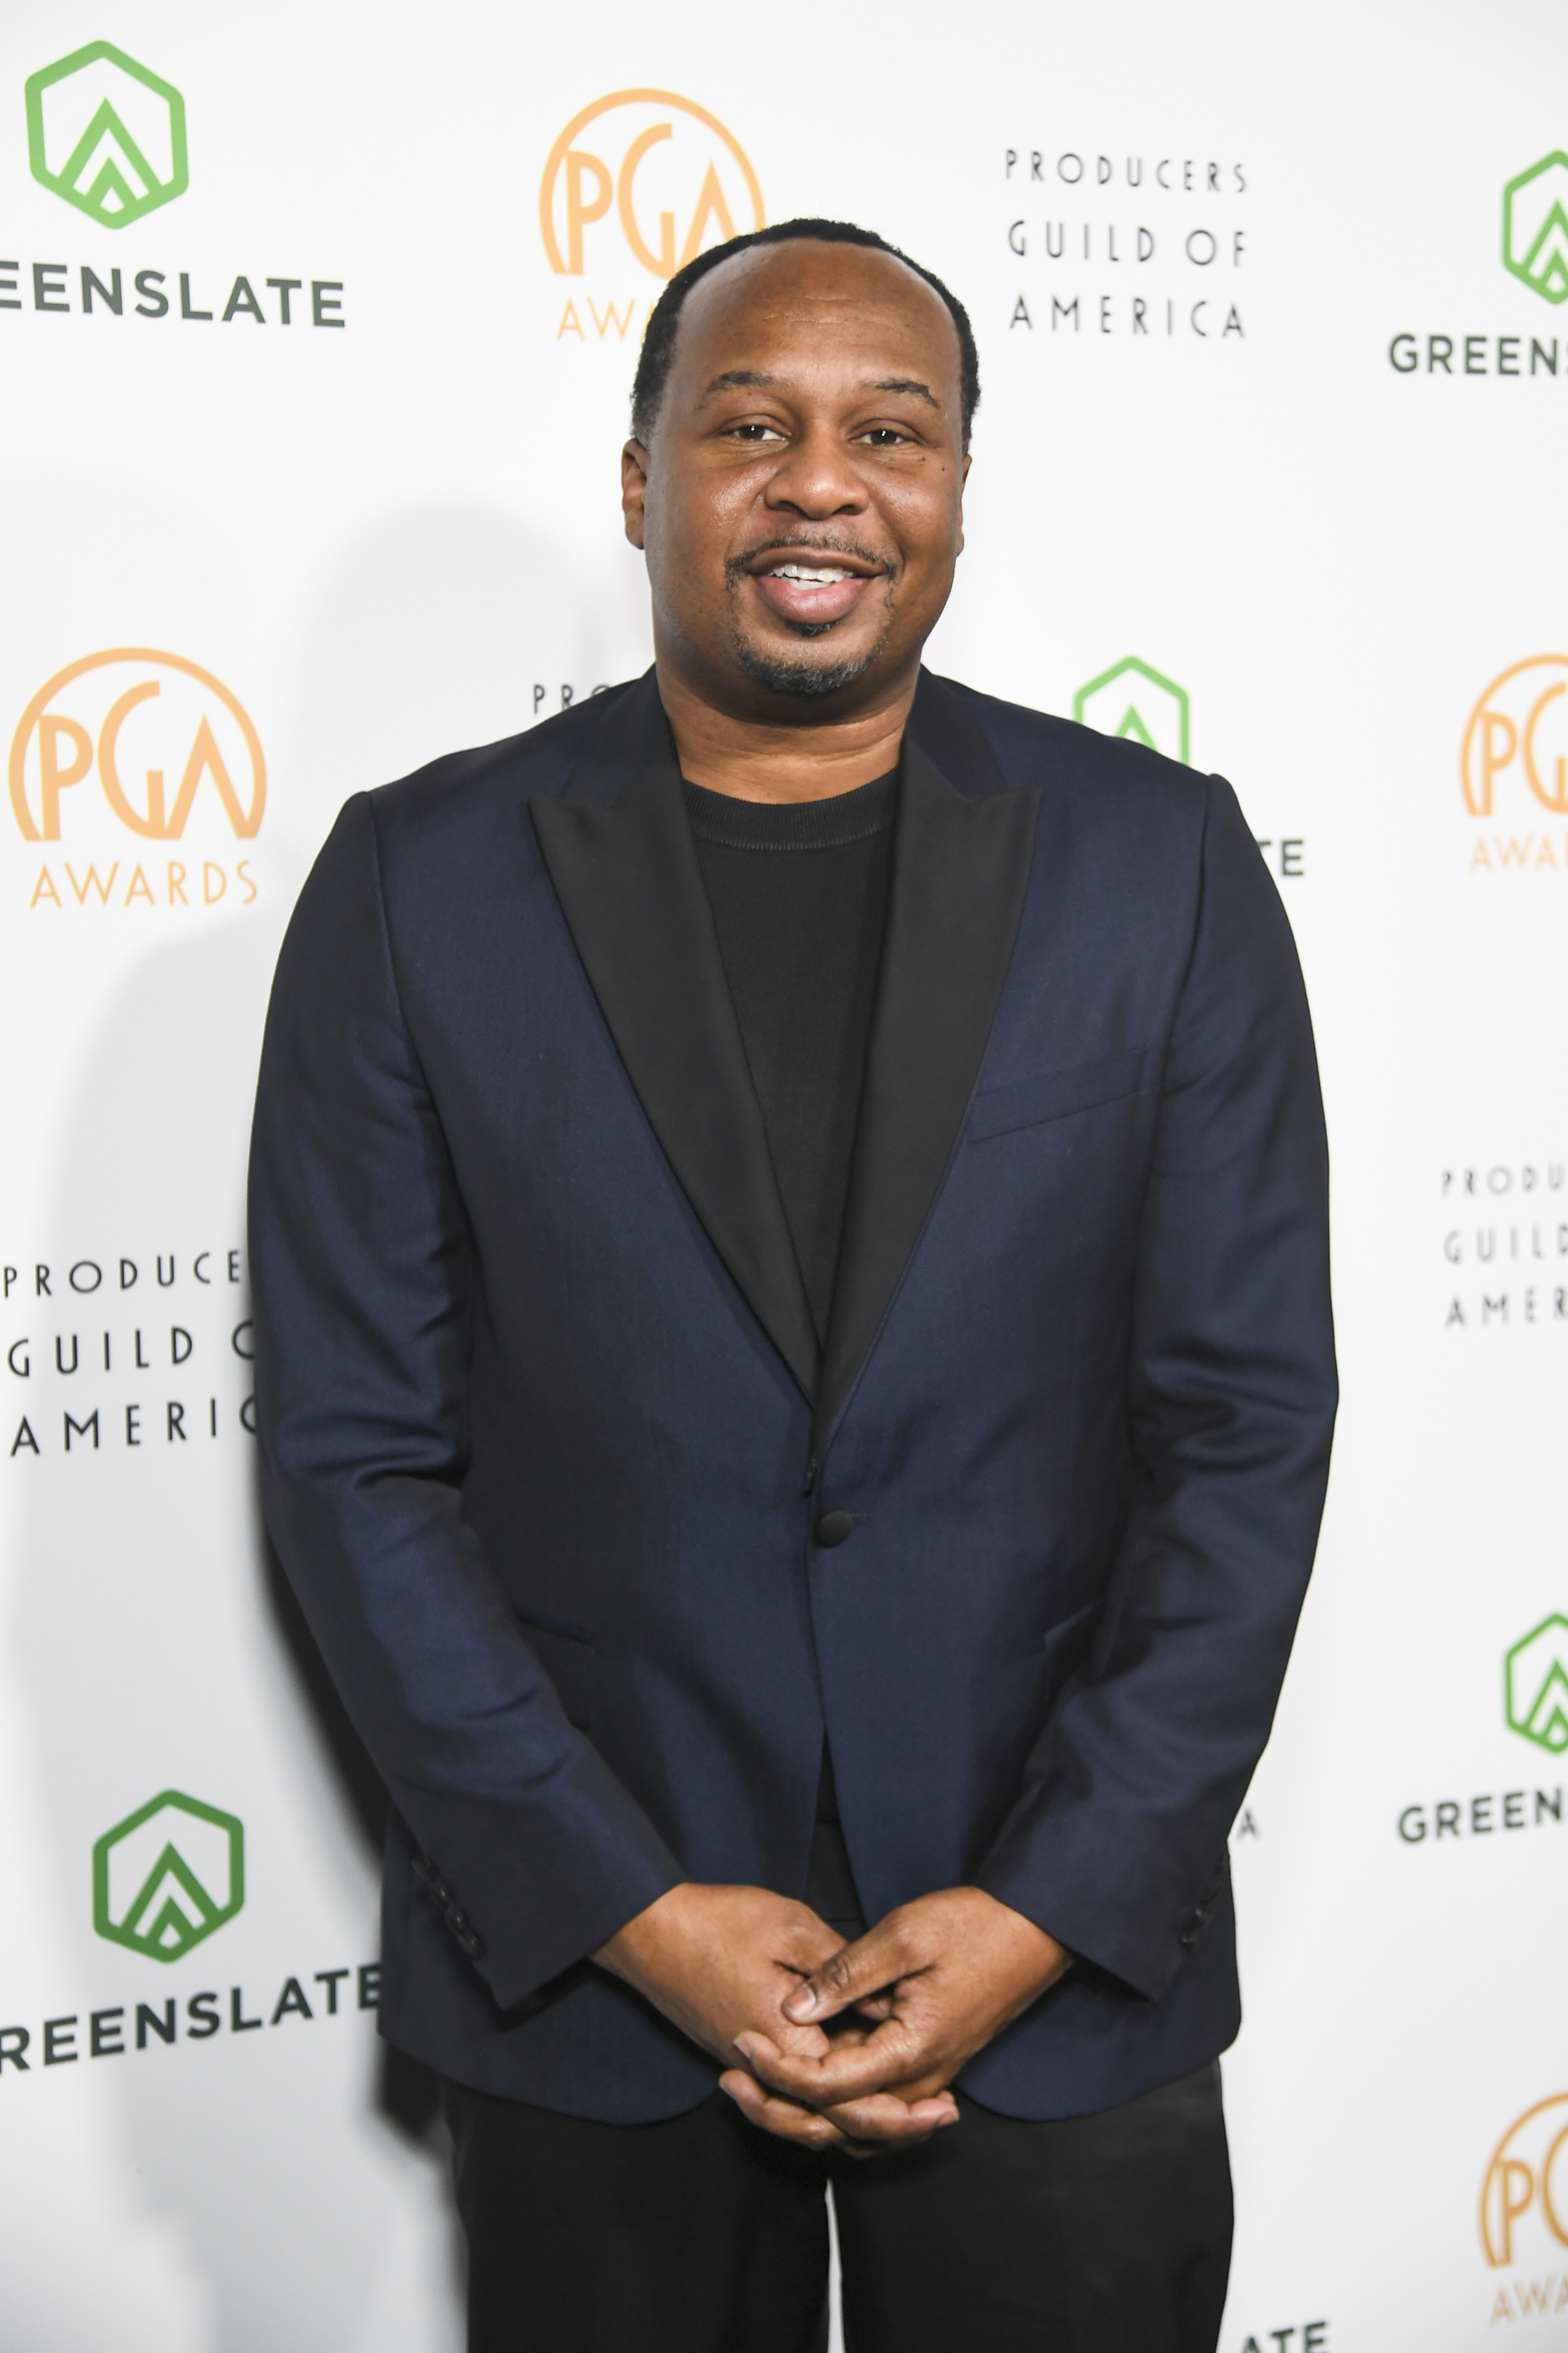 Roy smiles in a suit at the Producers Guild Awards backdrop